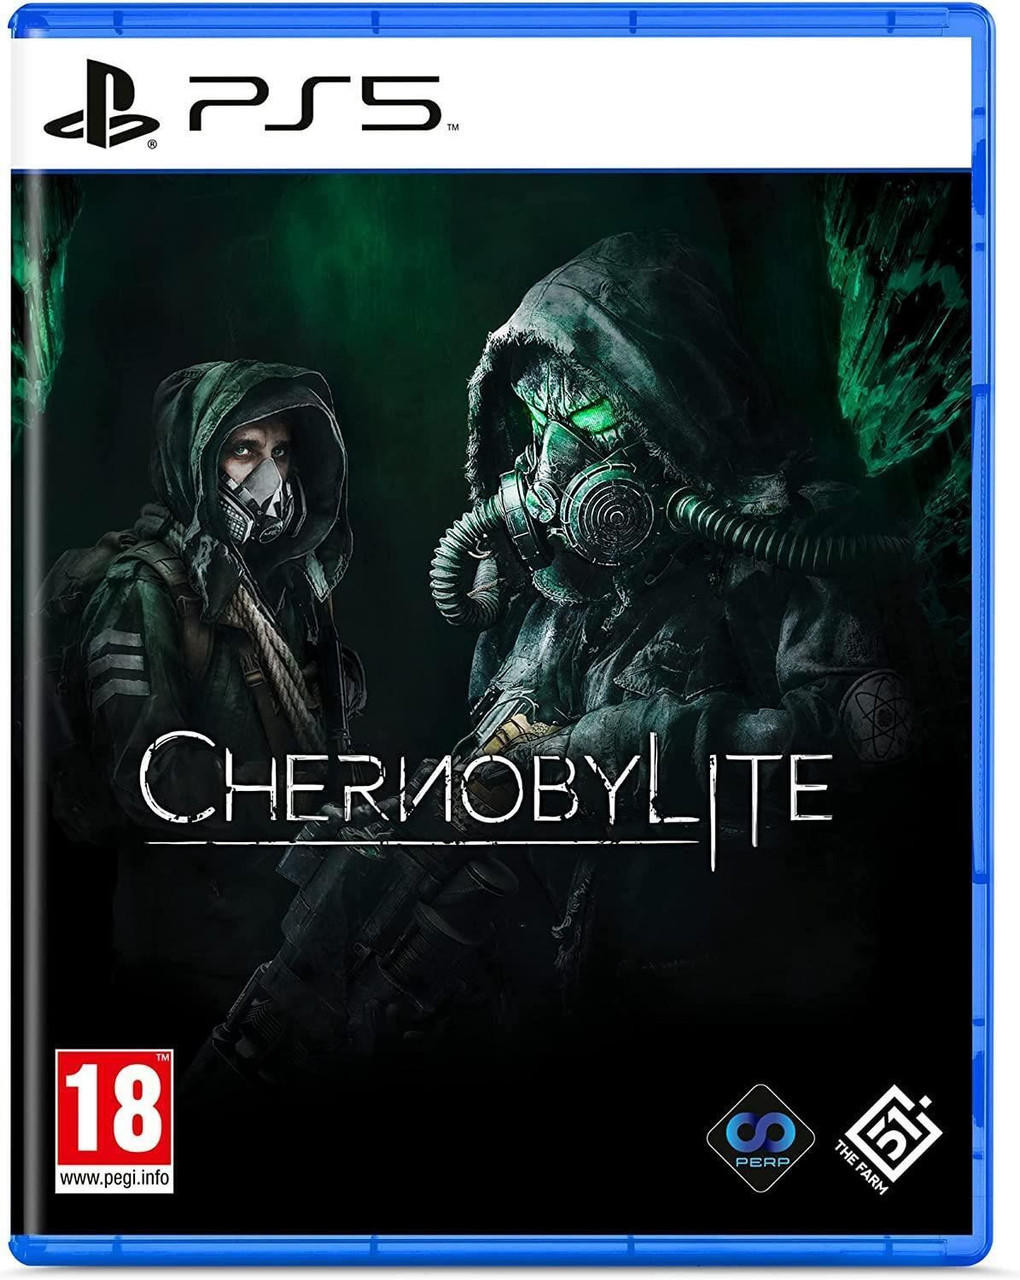 Chernobylite PS5 Game